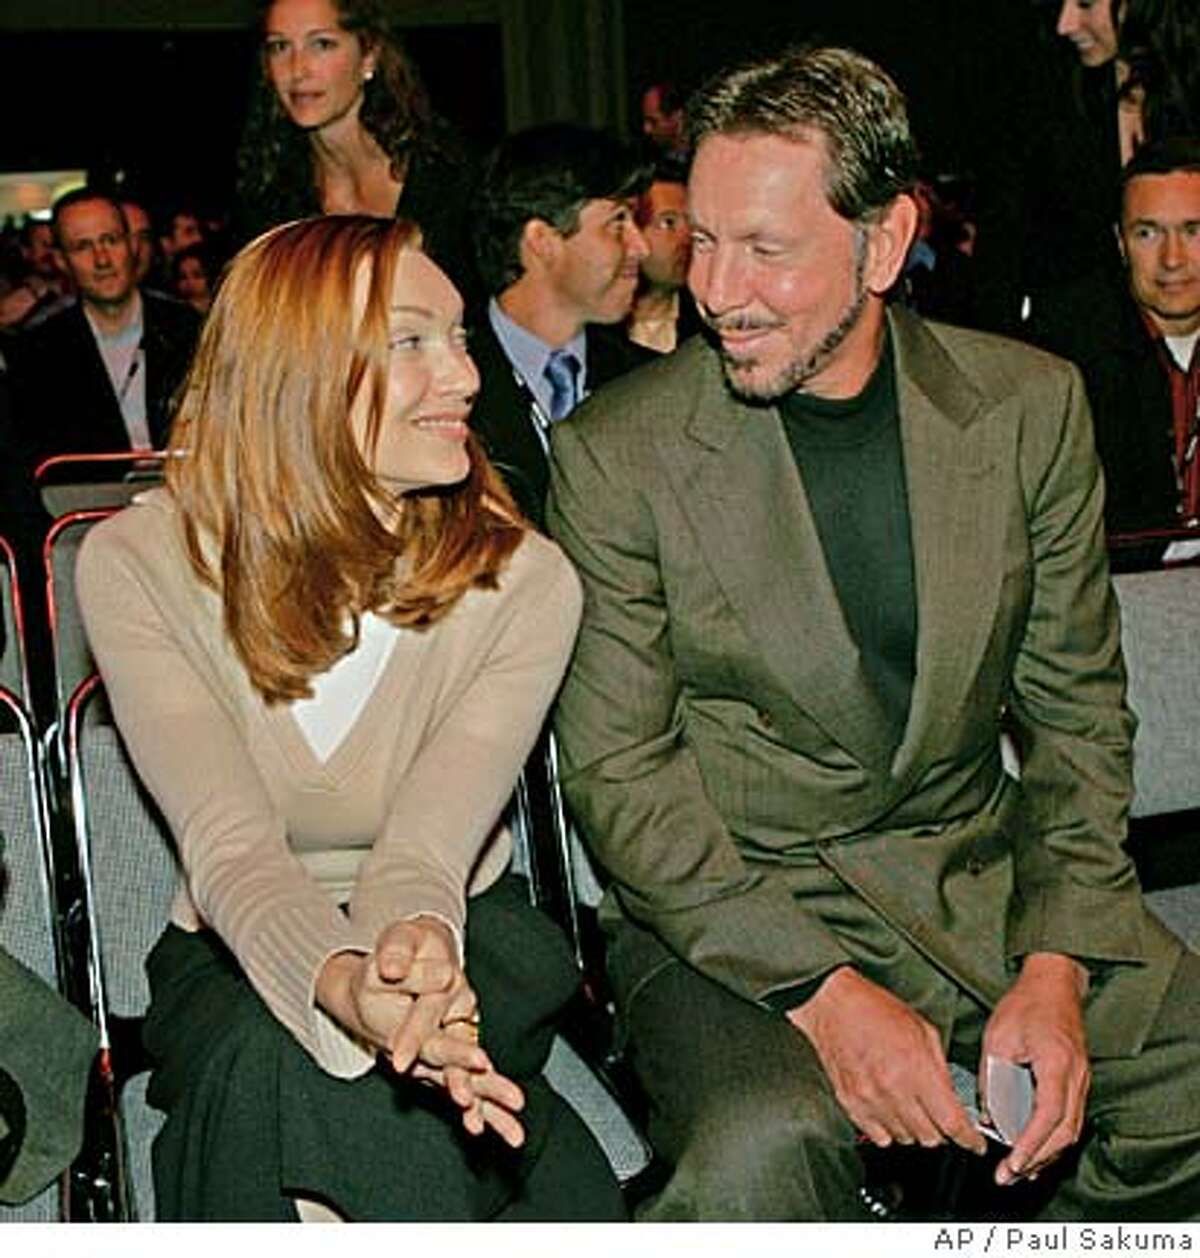 Oracle chief executive Larry Ellison smiles at his wife, Melanie Ellison, before he gave a keynote address at the Oracle Open World Conference in San Francisco, Wednesday, Sept. 21, 2005. (AP Photo/Paul Sakuma)